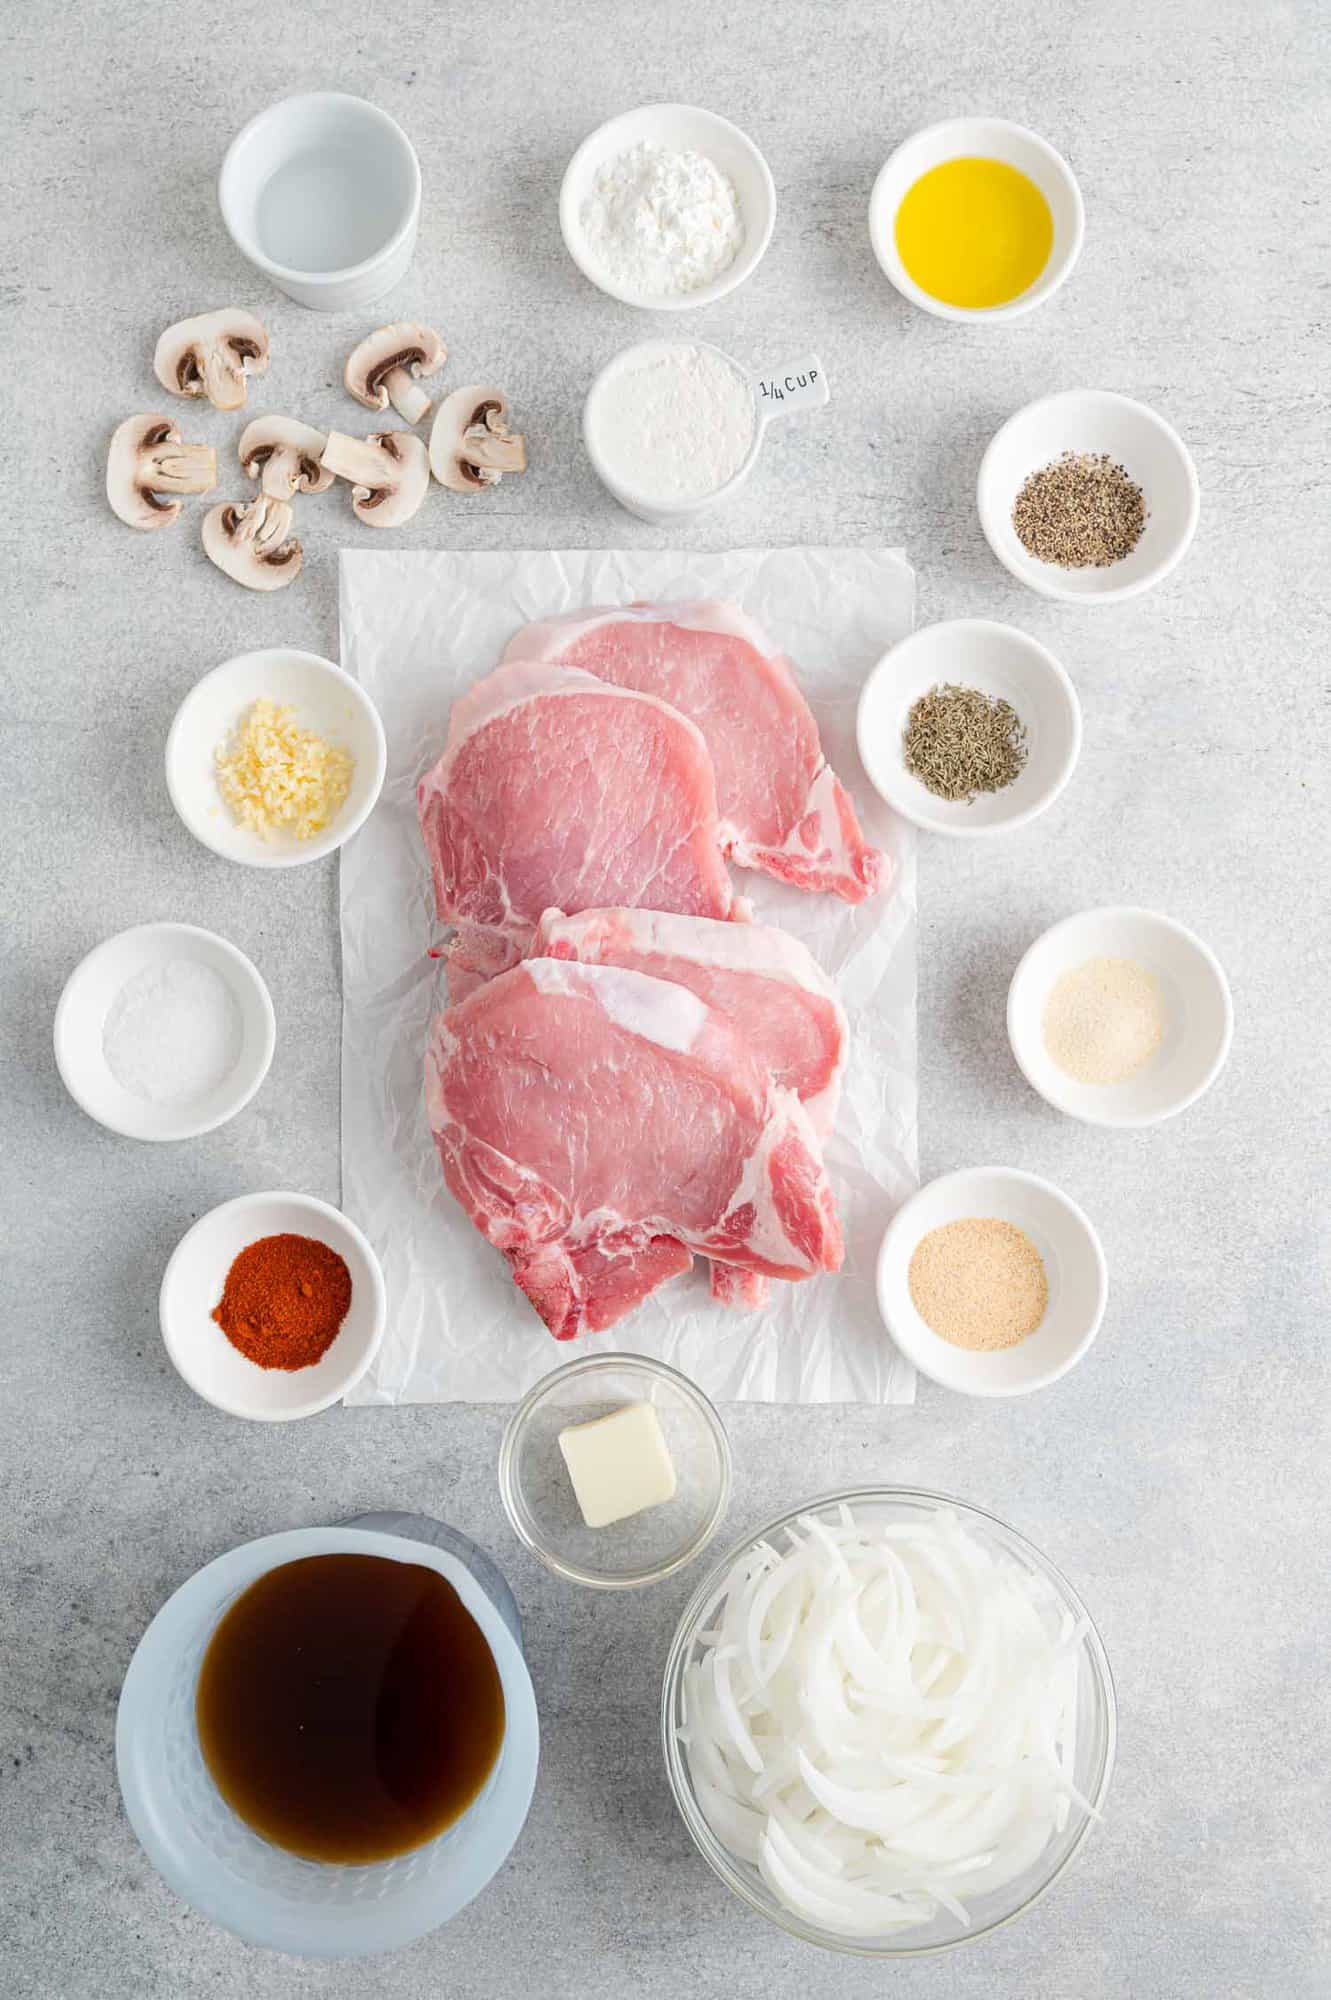 The ingredients for slow cooker pork chops.